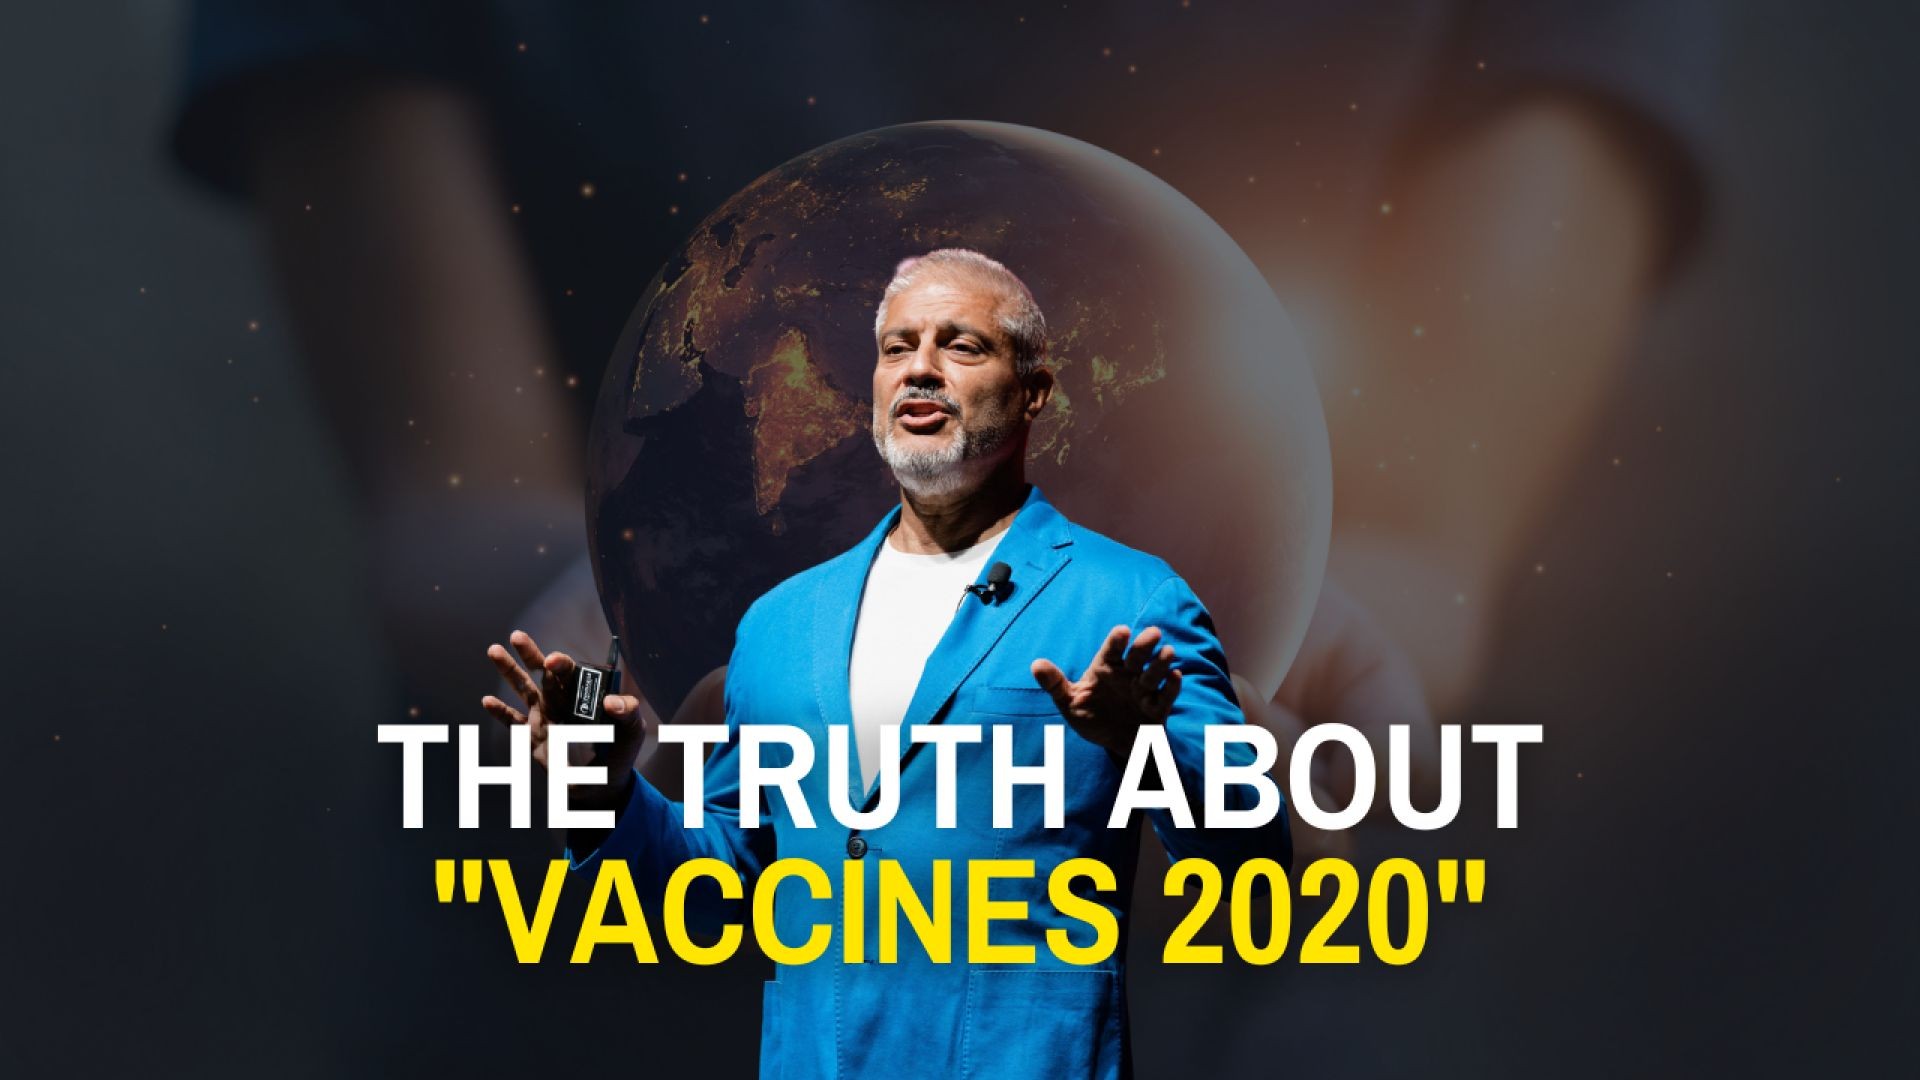 A Roundtable Discussion on Vaccines: Dr Buttar, RFK Jr, Dr Tenpenny, Dr Wakefield and others...